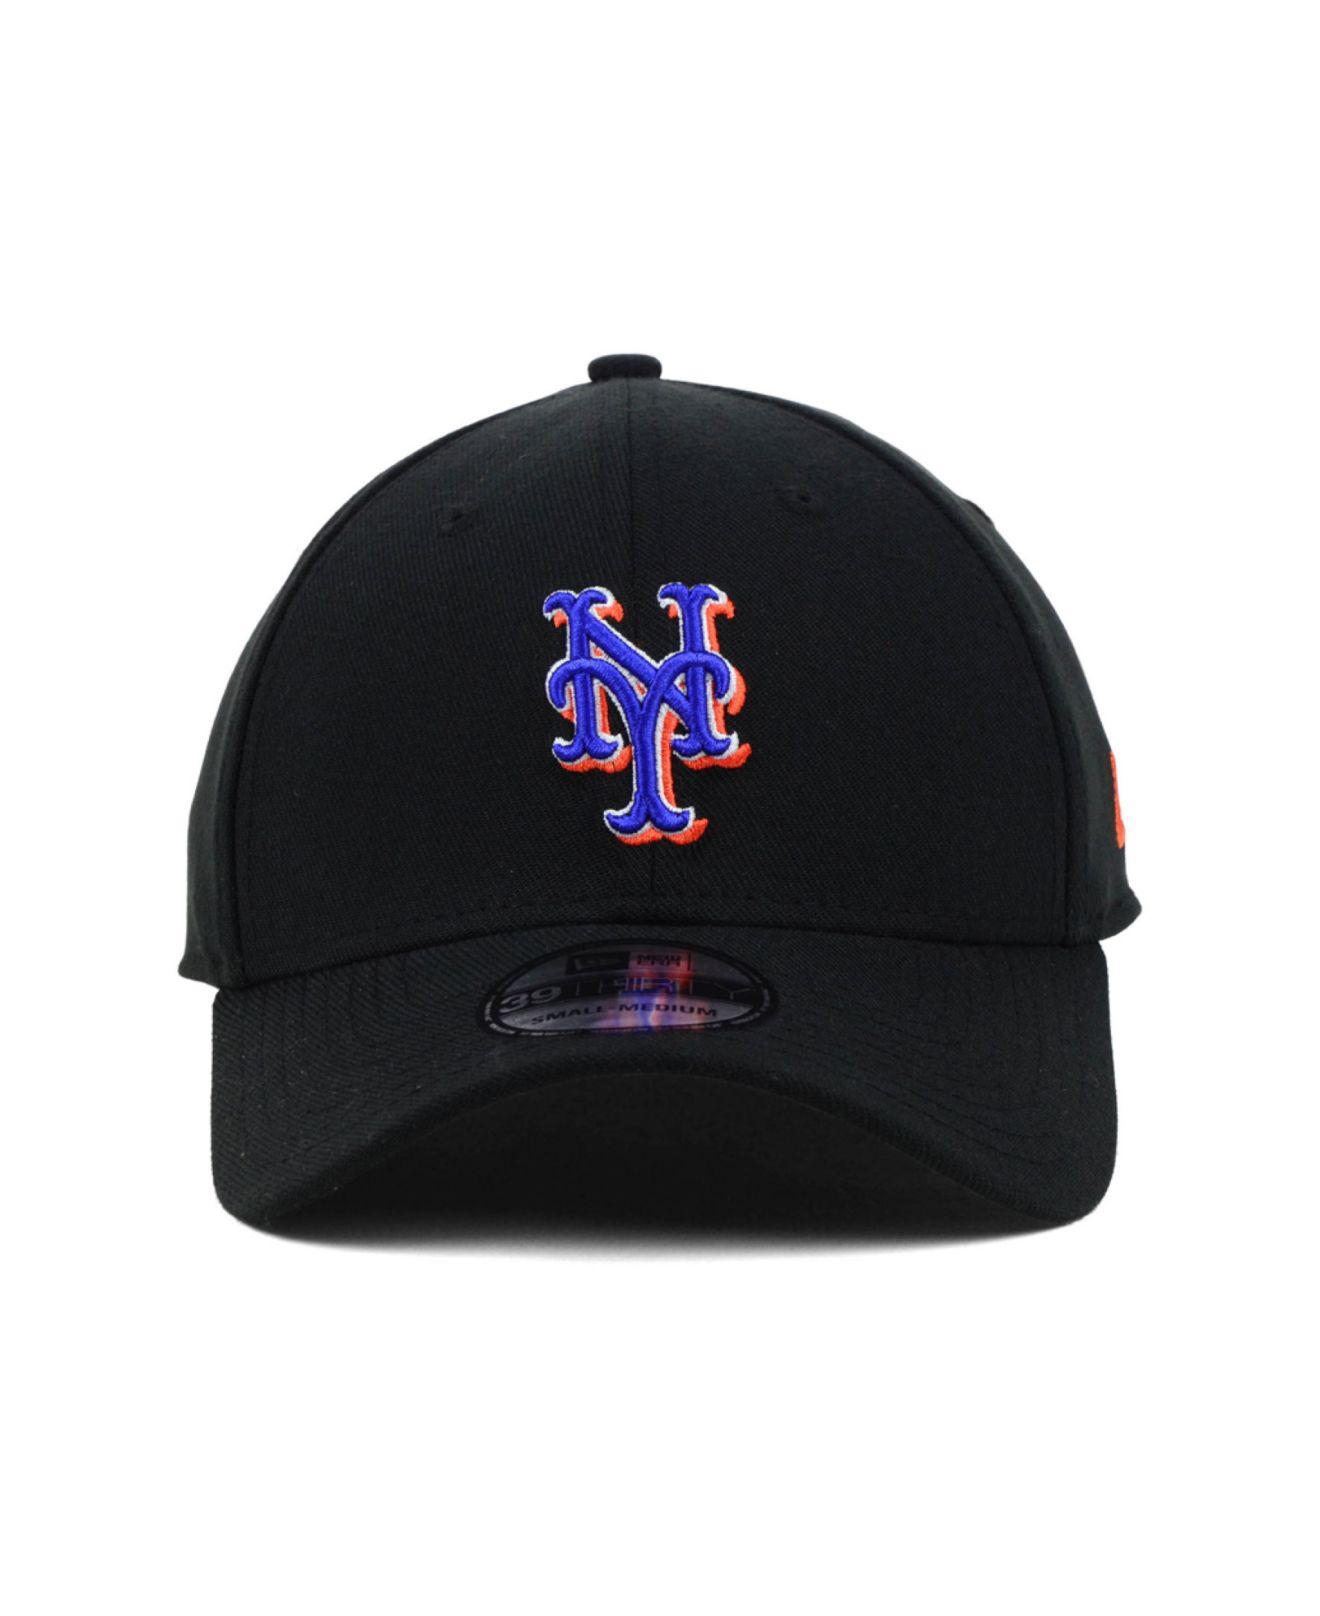 New Era Men's New York Mets White 39THIRTY Classic Stretch Fit Hat